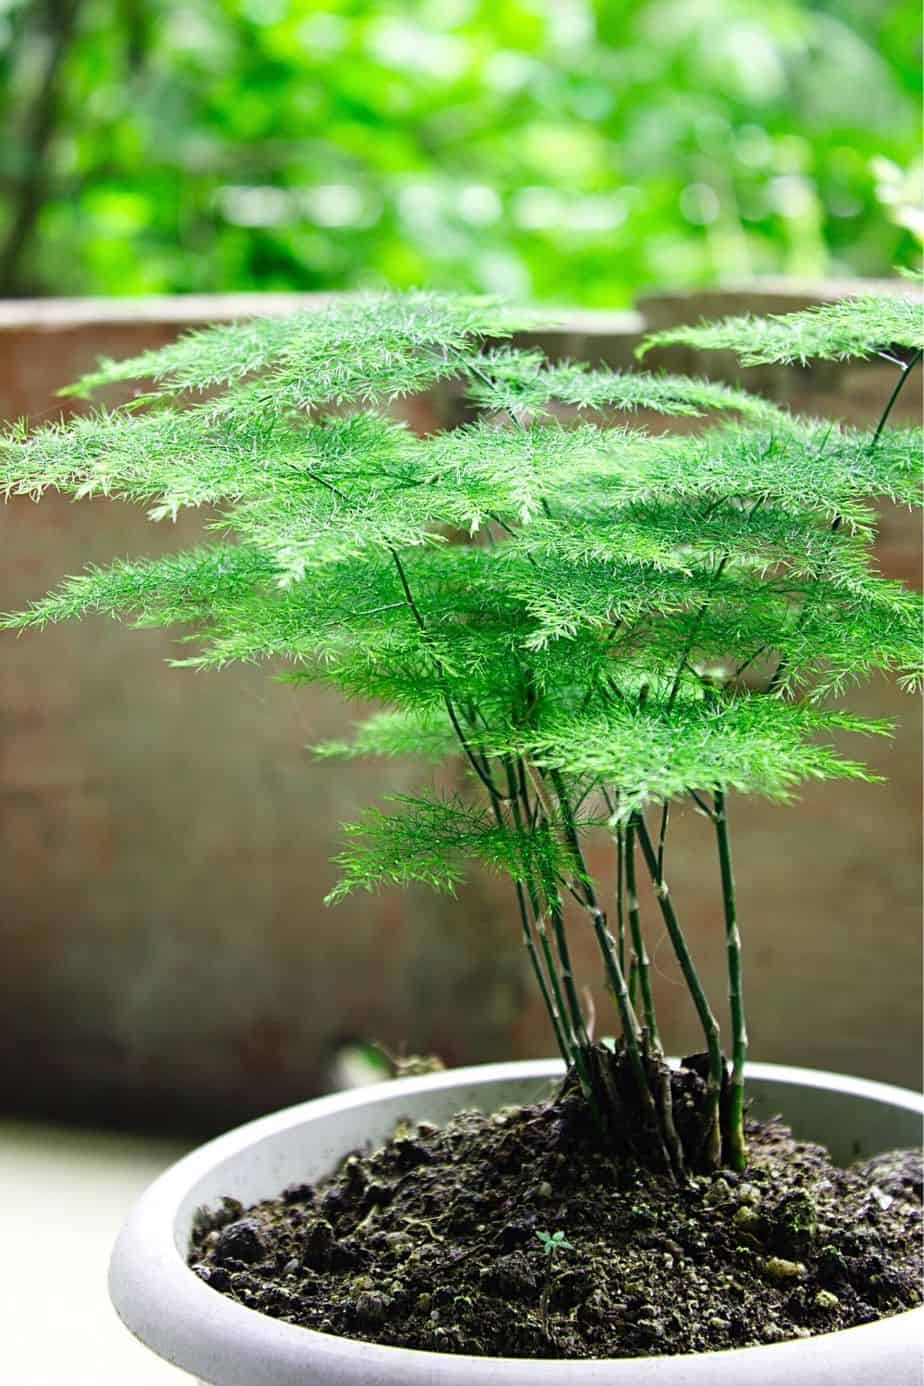 Asparagus Fern contains sapogenin that can cause dermatitis in cats